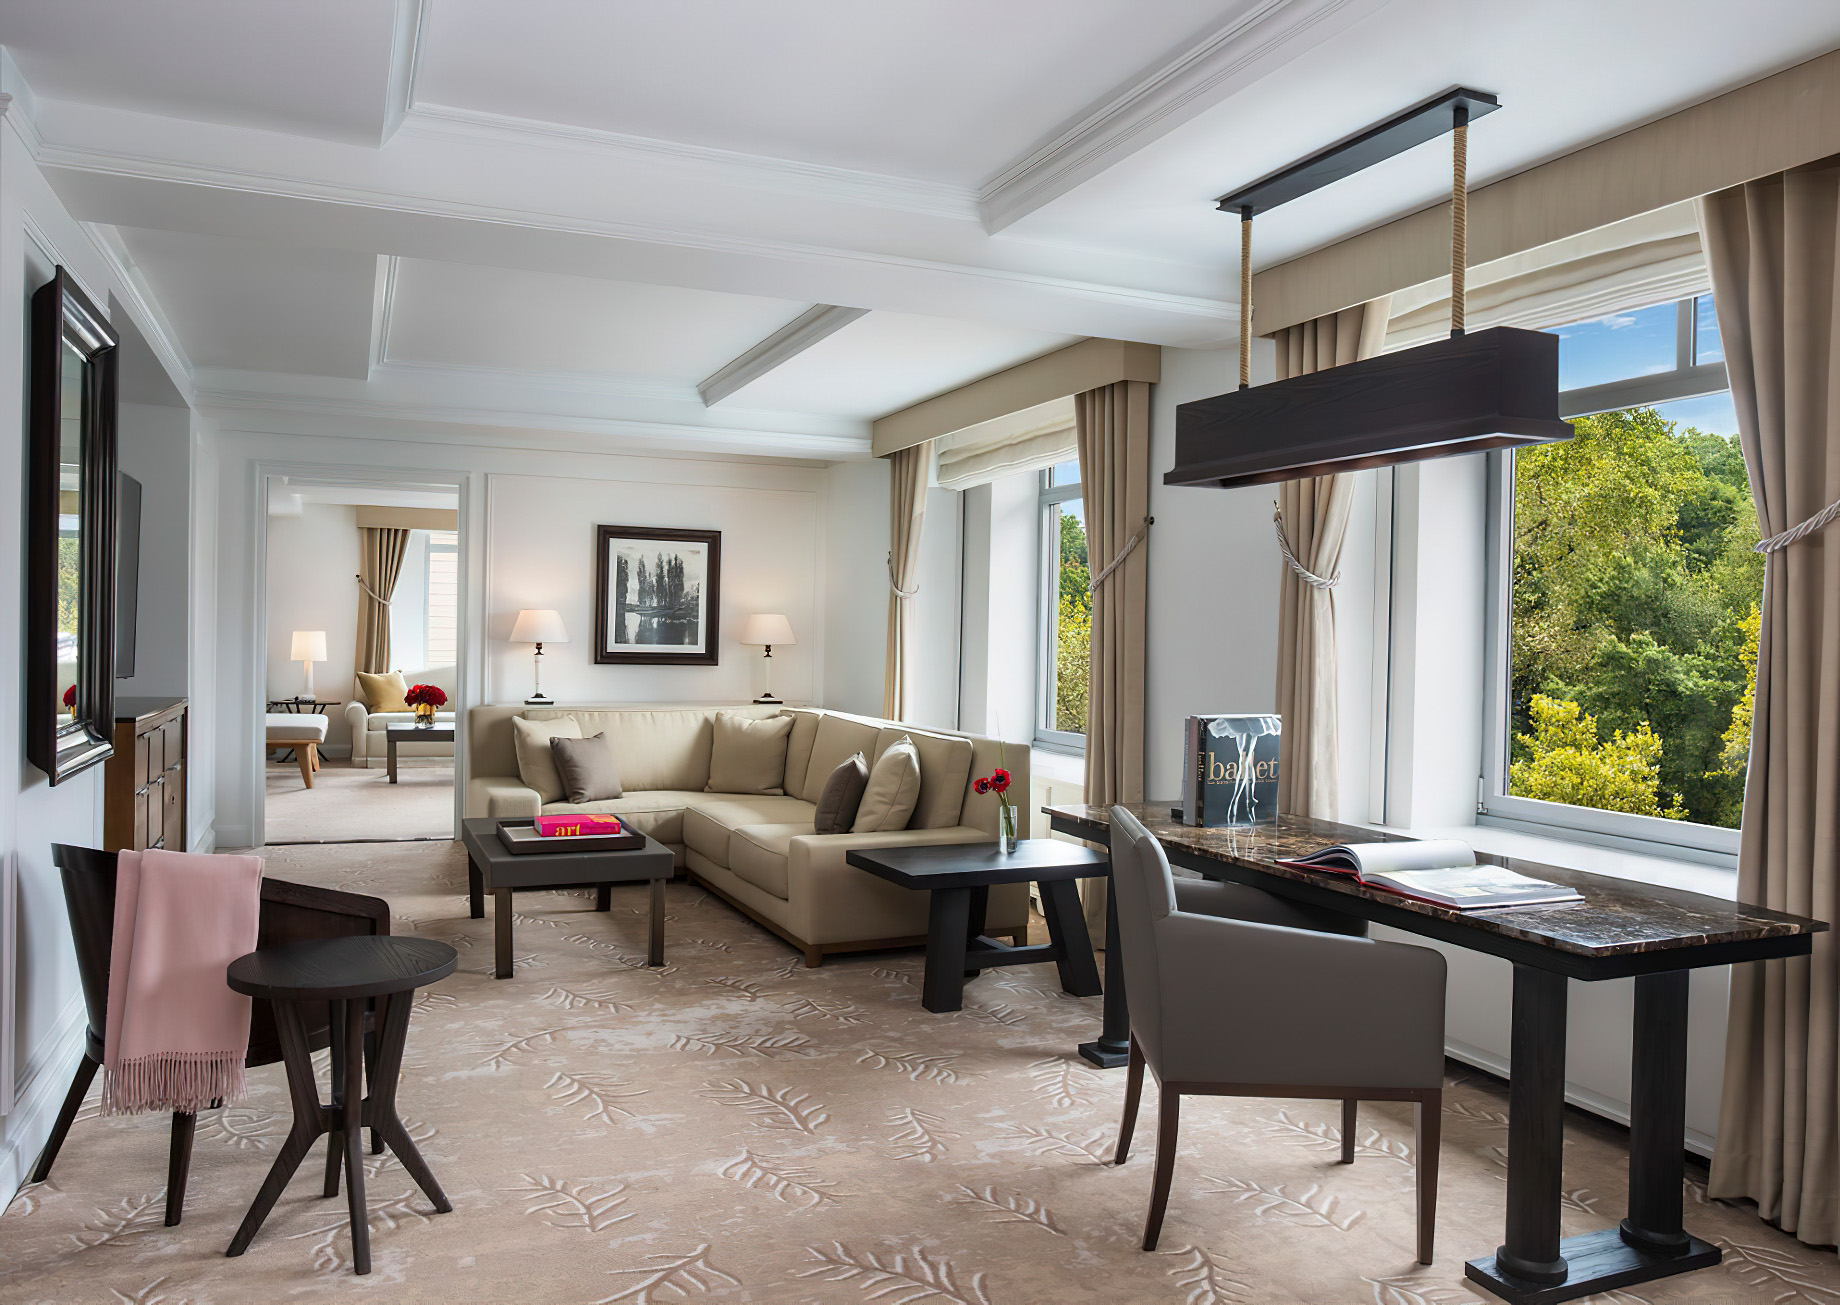 The Ritz-Carlton New York, Central Park Hotel – New York, NY, USA – The Artists Gate Suite Living Room